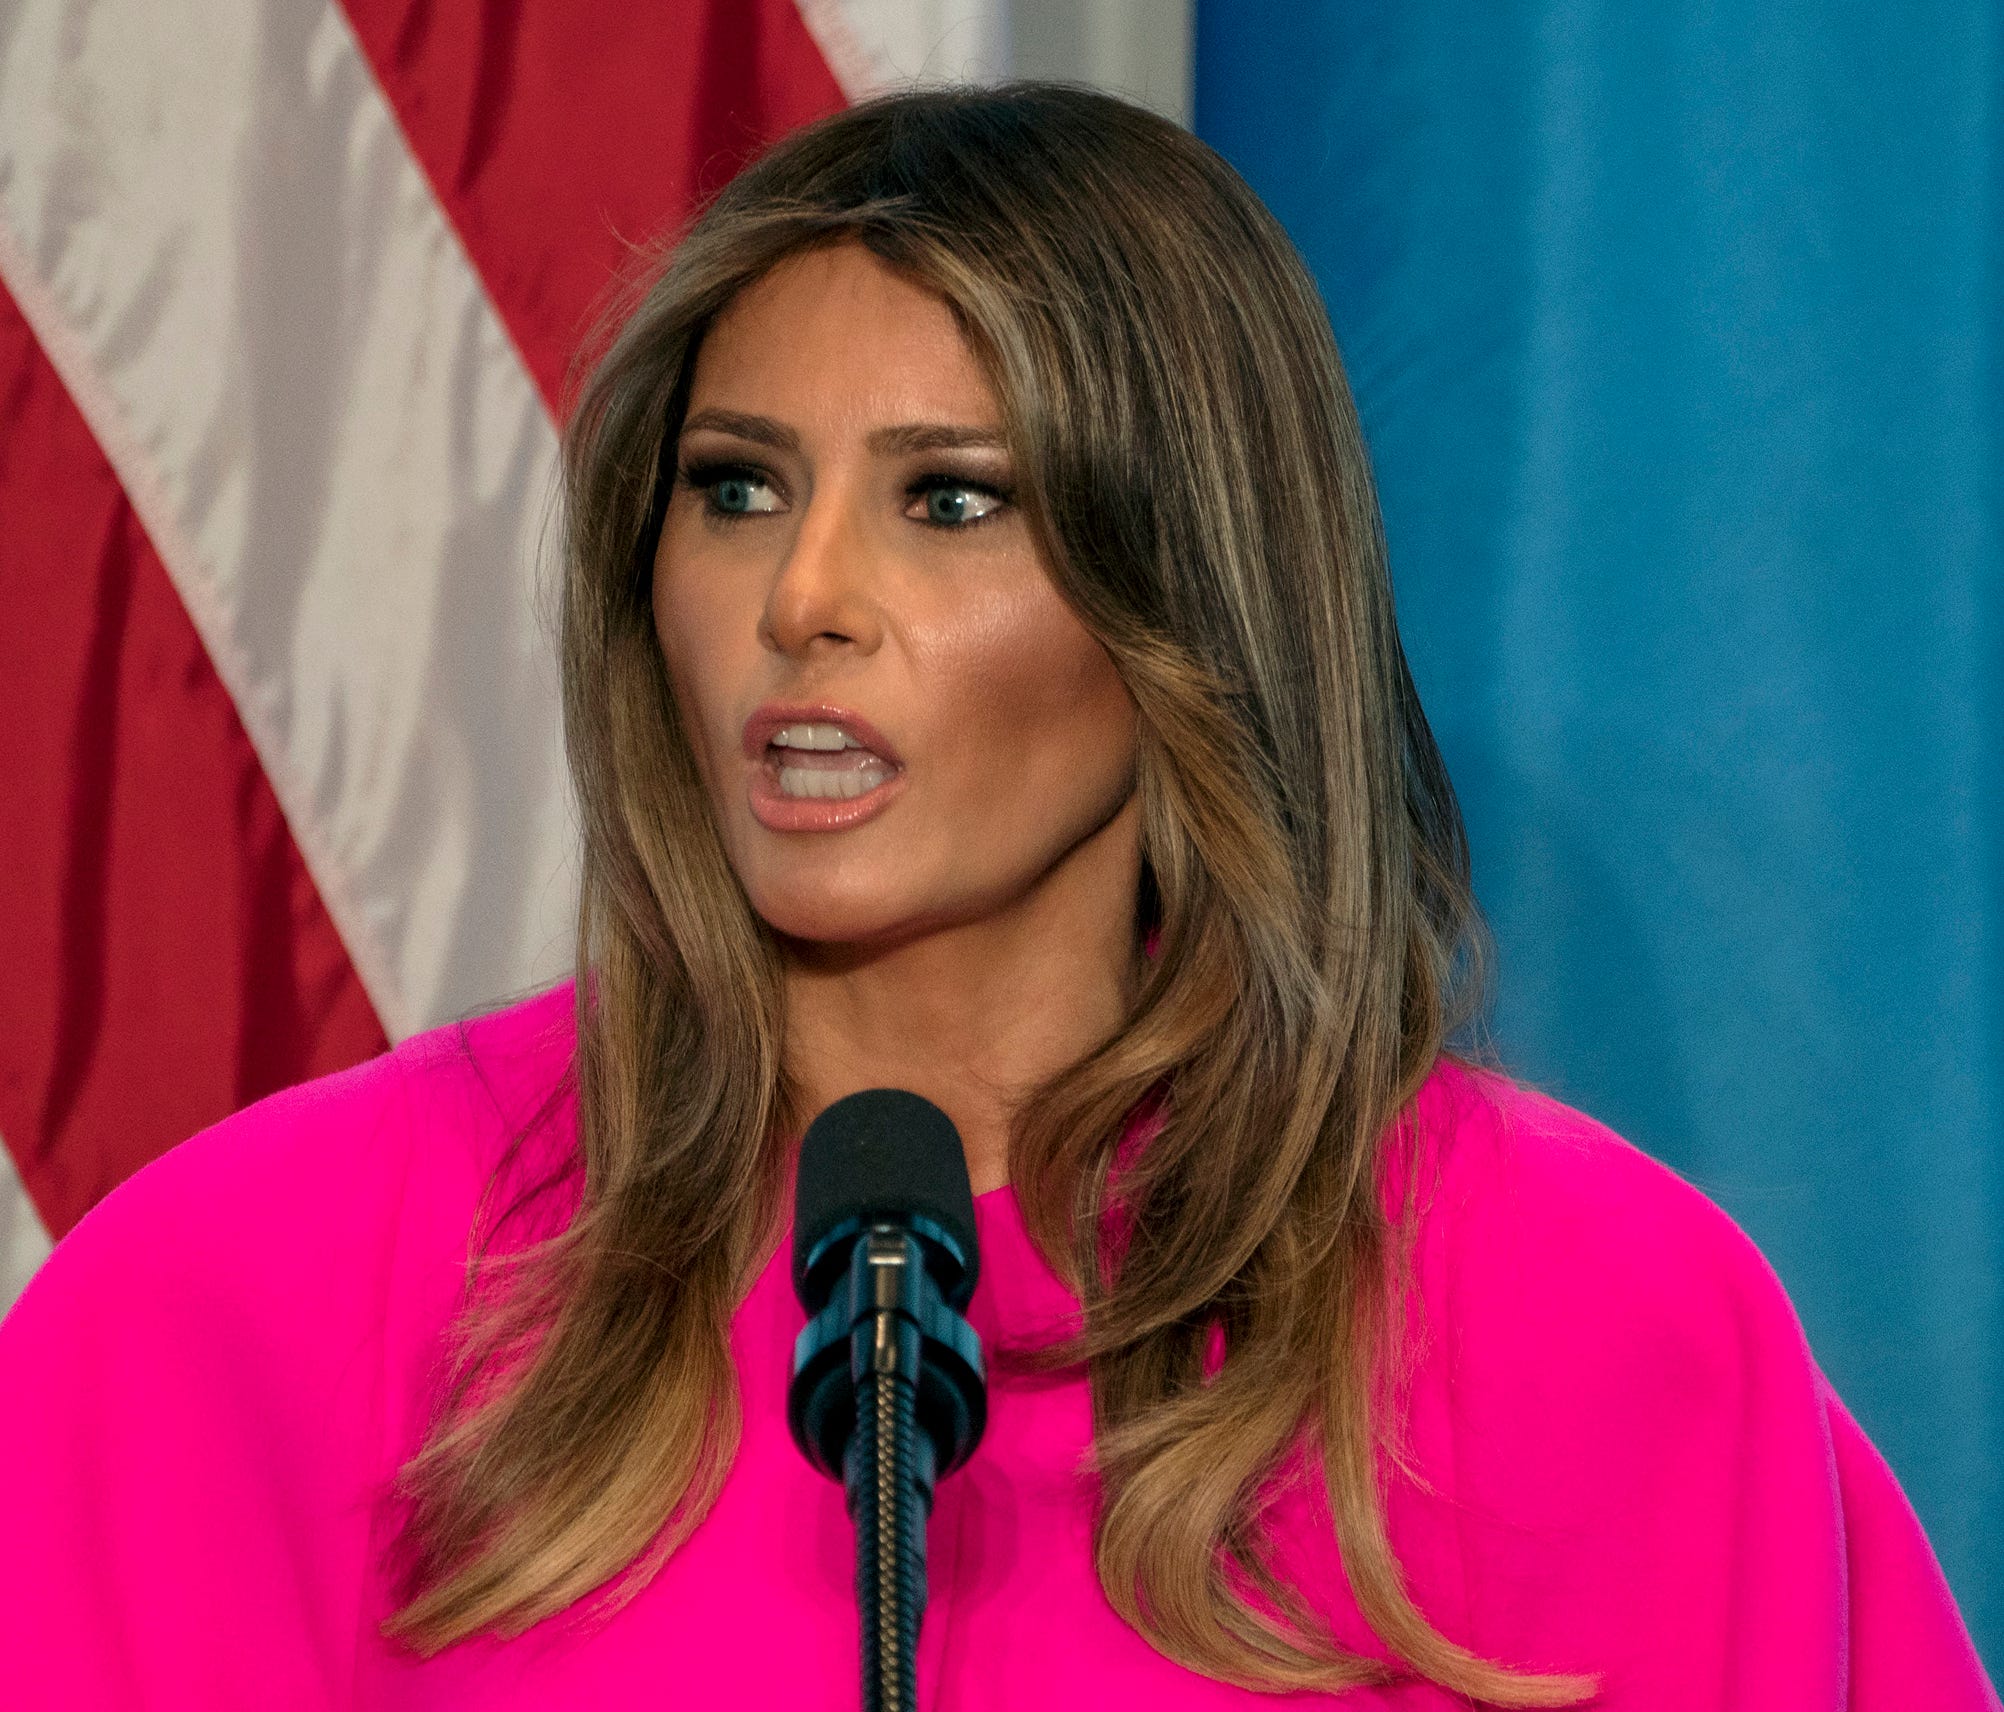 First lady Melania Trump addresses a luncheon at the U.S. Mission to the United Nations in New York on Sept. 20, 2017.